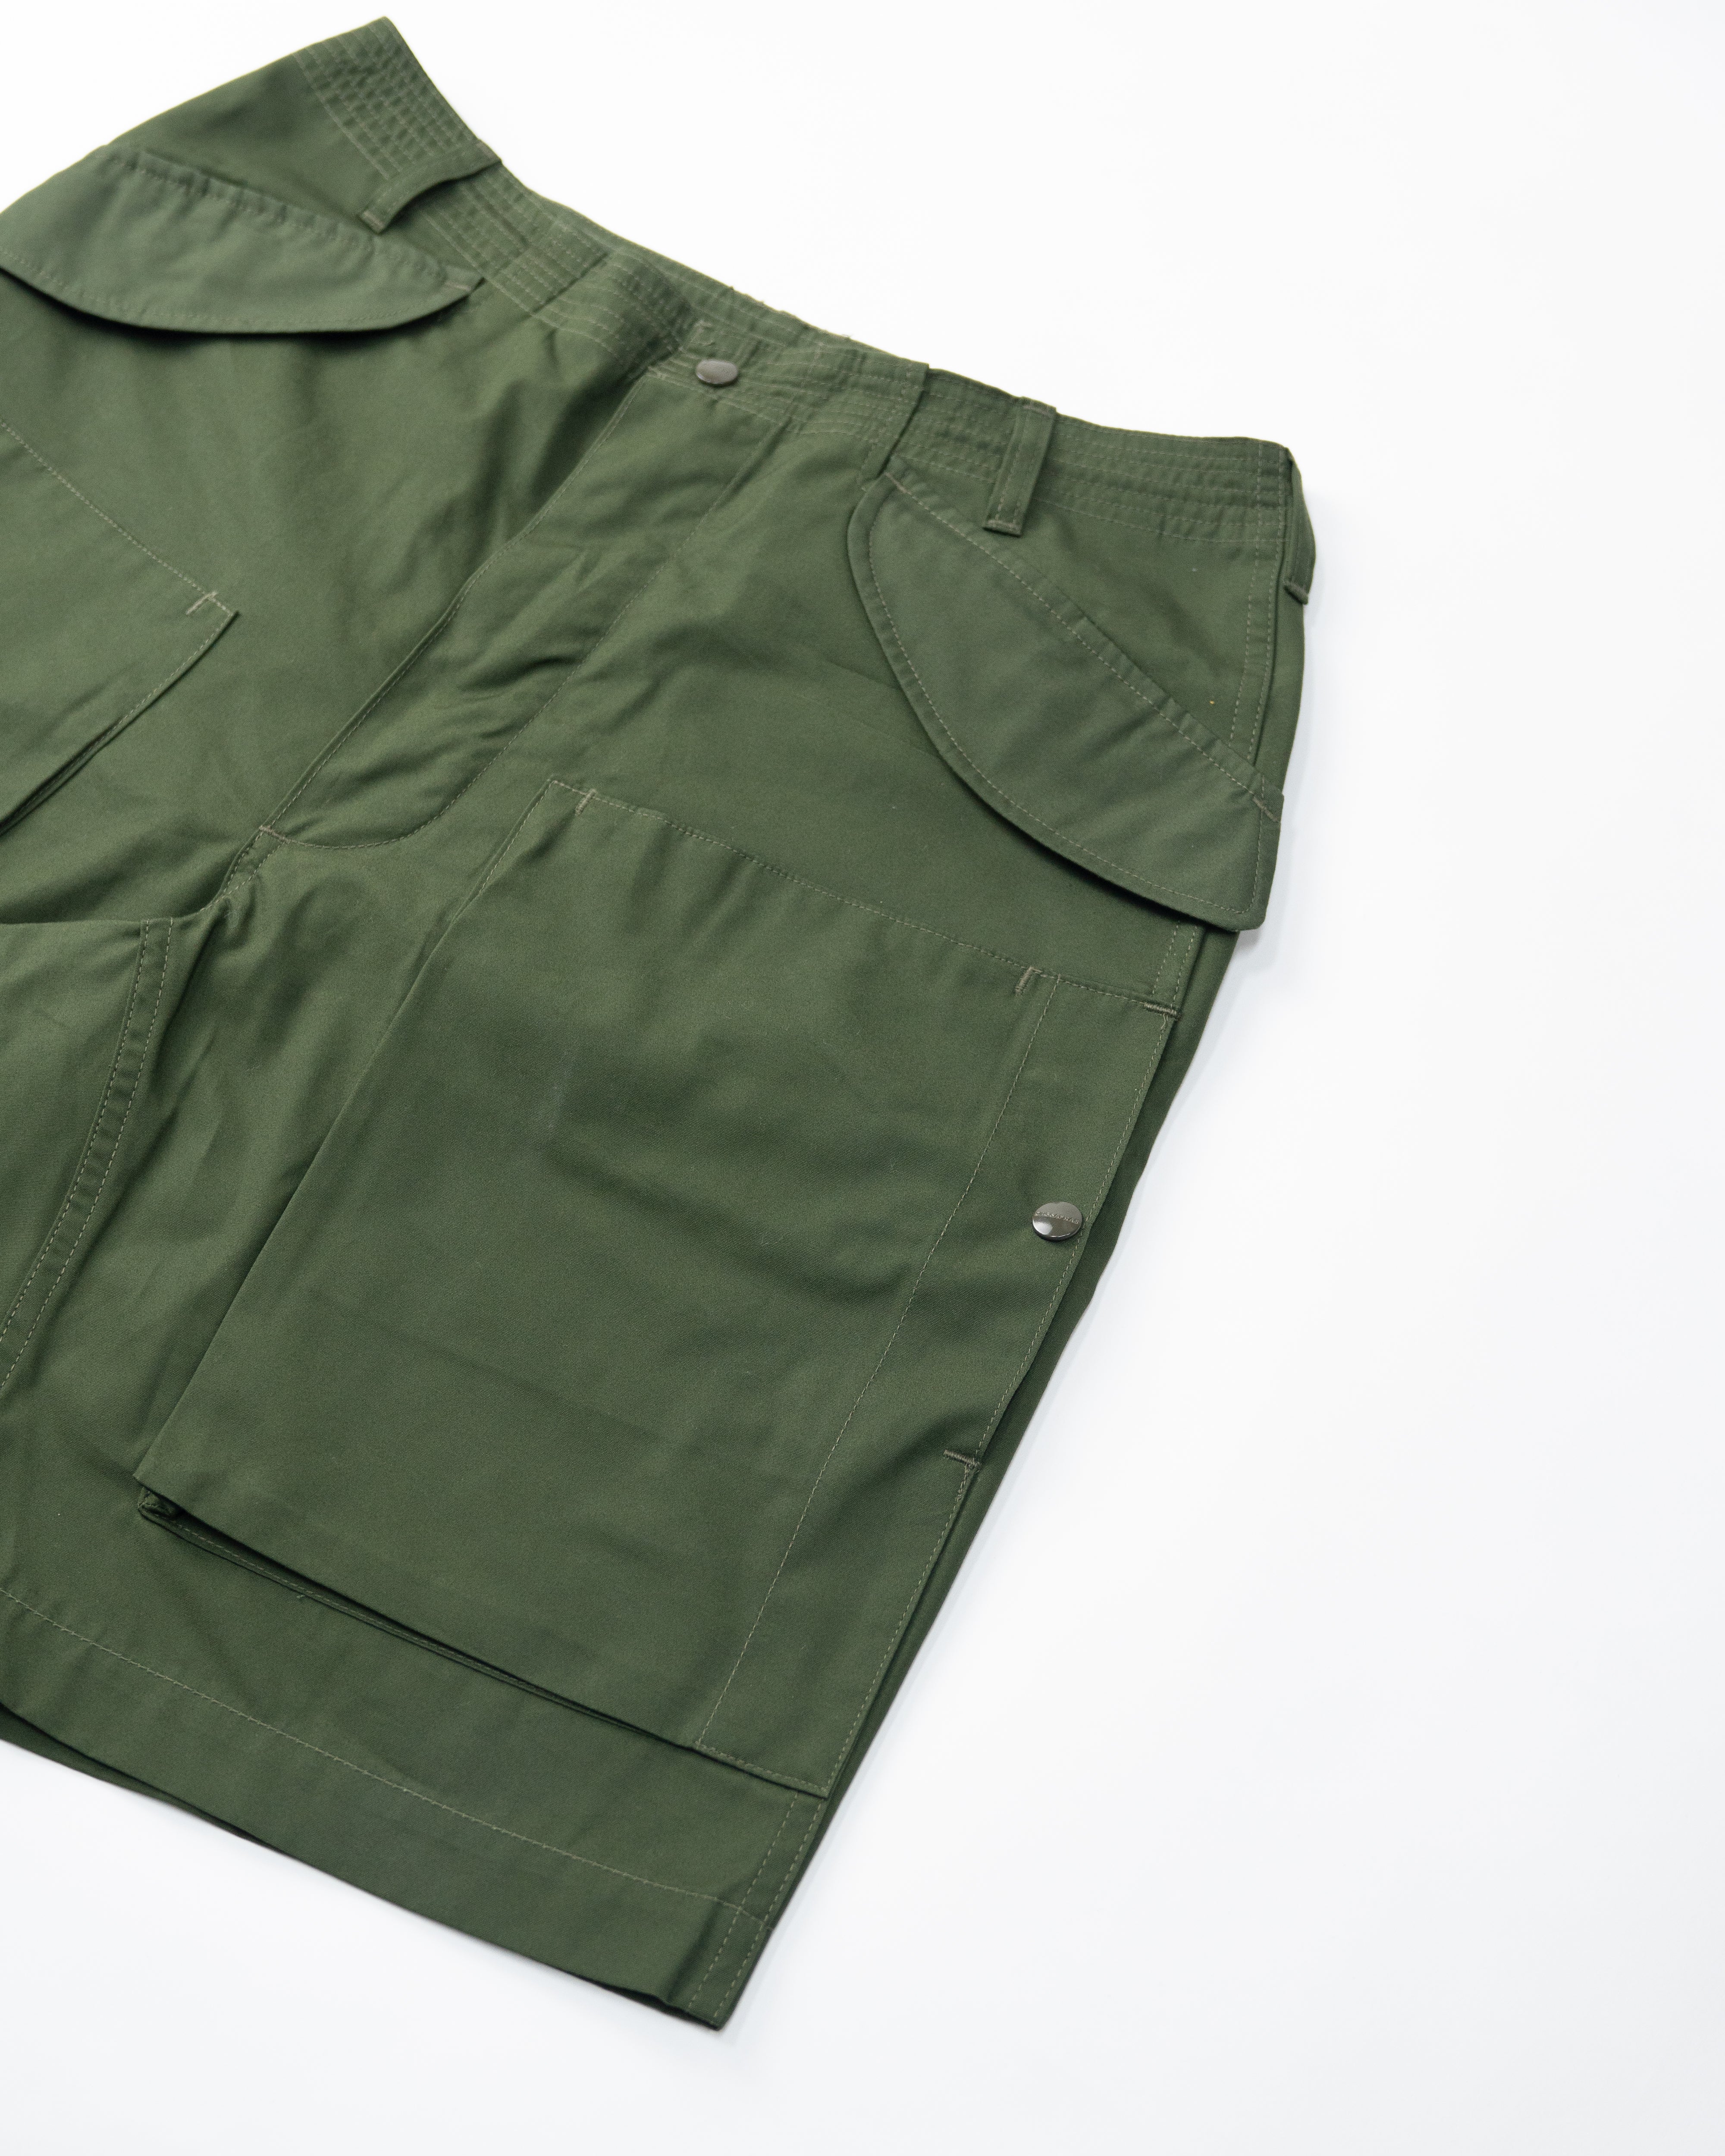 D/C Armor Shorts SF-232027 | Olive